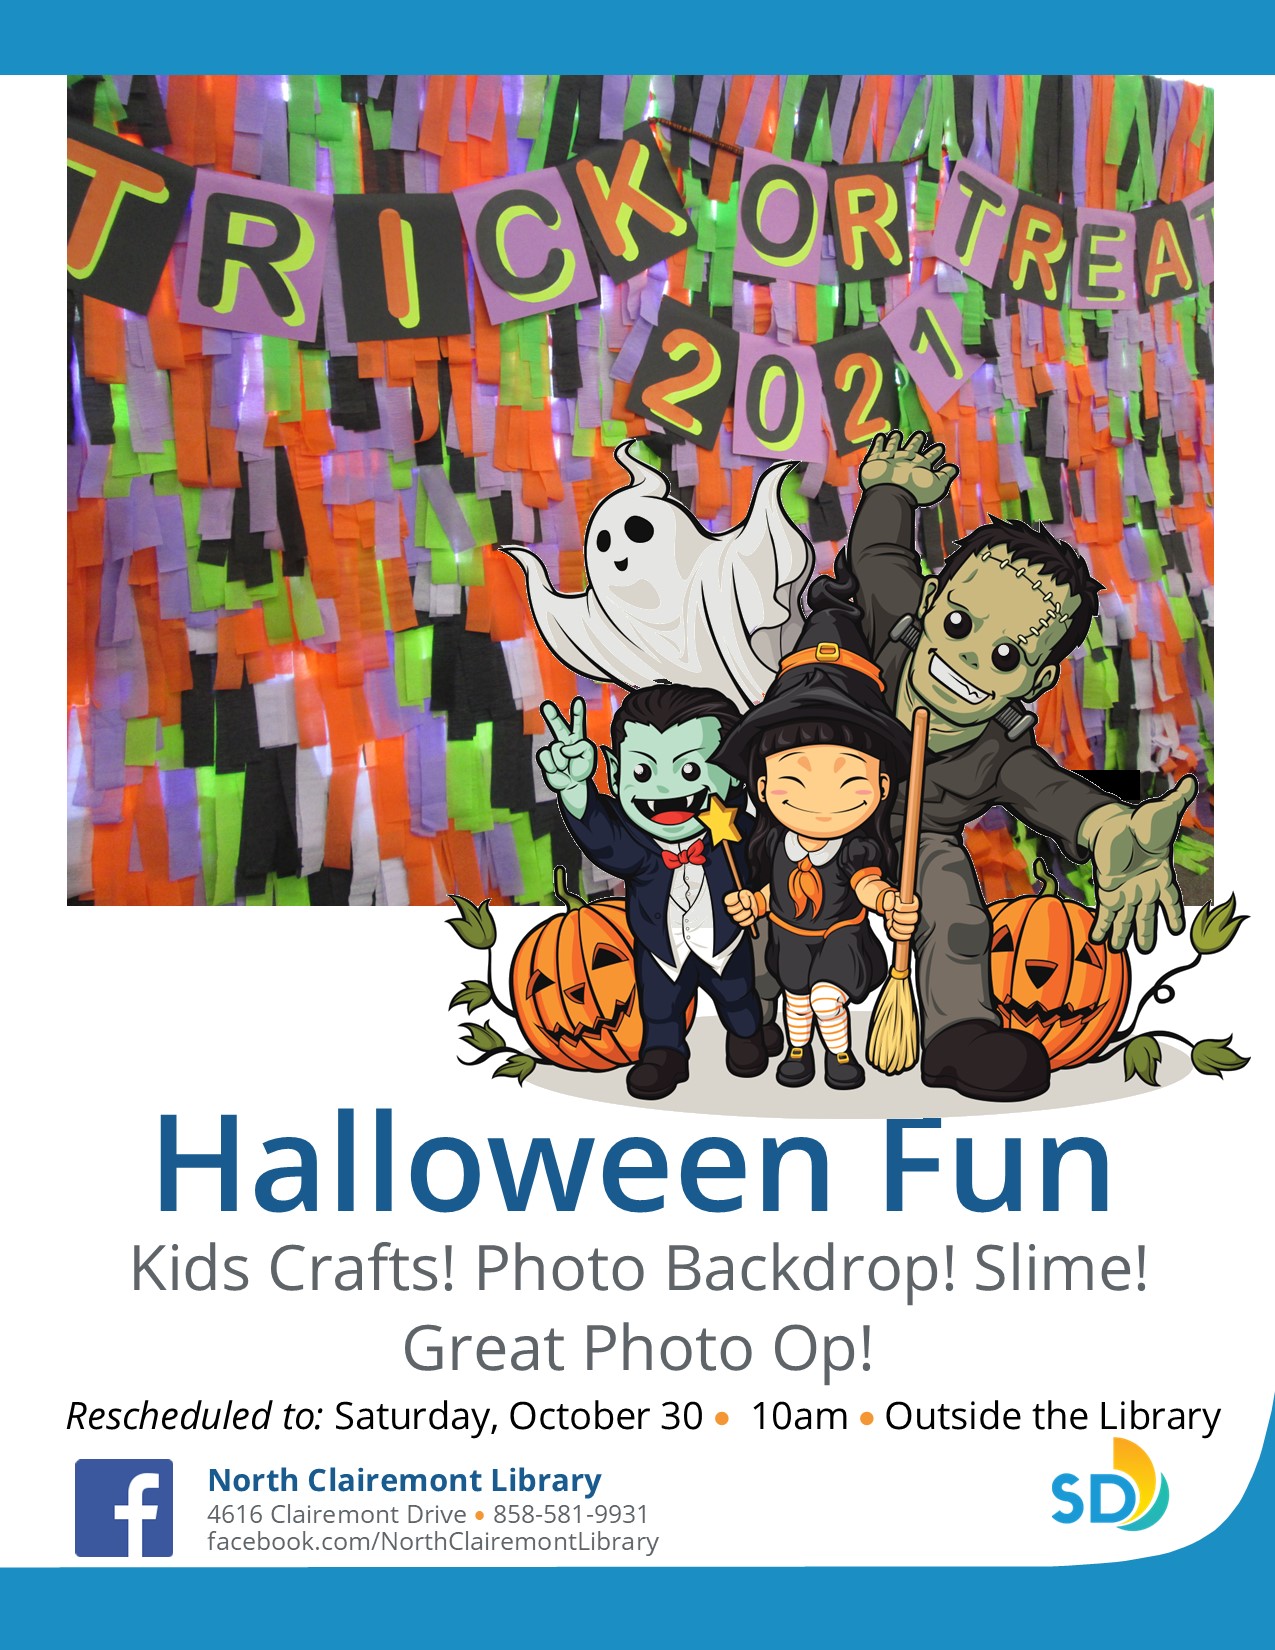 Children 3-11 and their parents, please join North Clairemont Library for crafts and photos ops. Costumes encouraged!